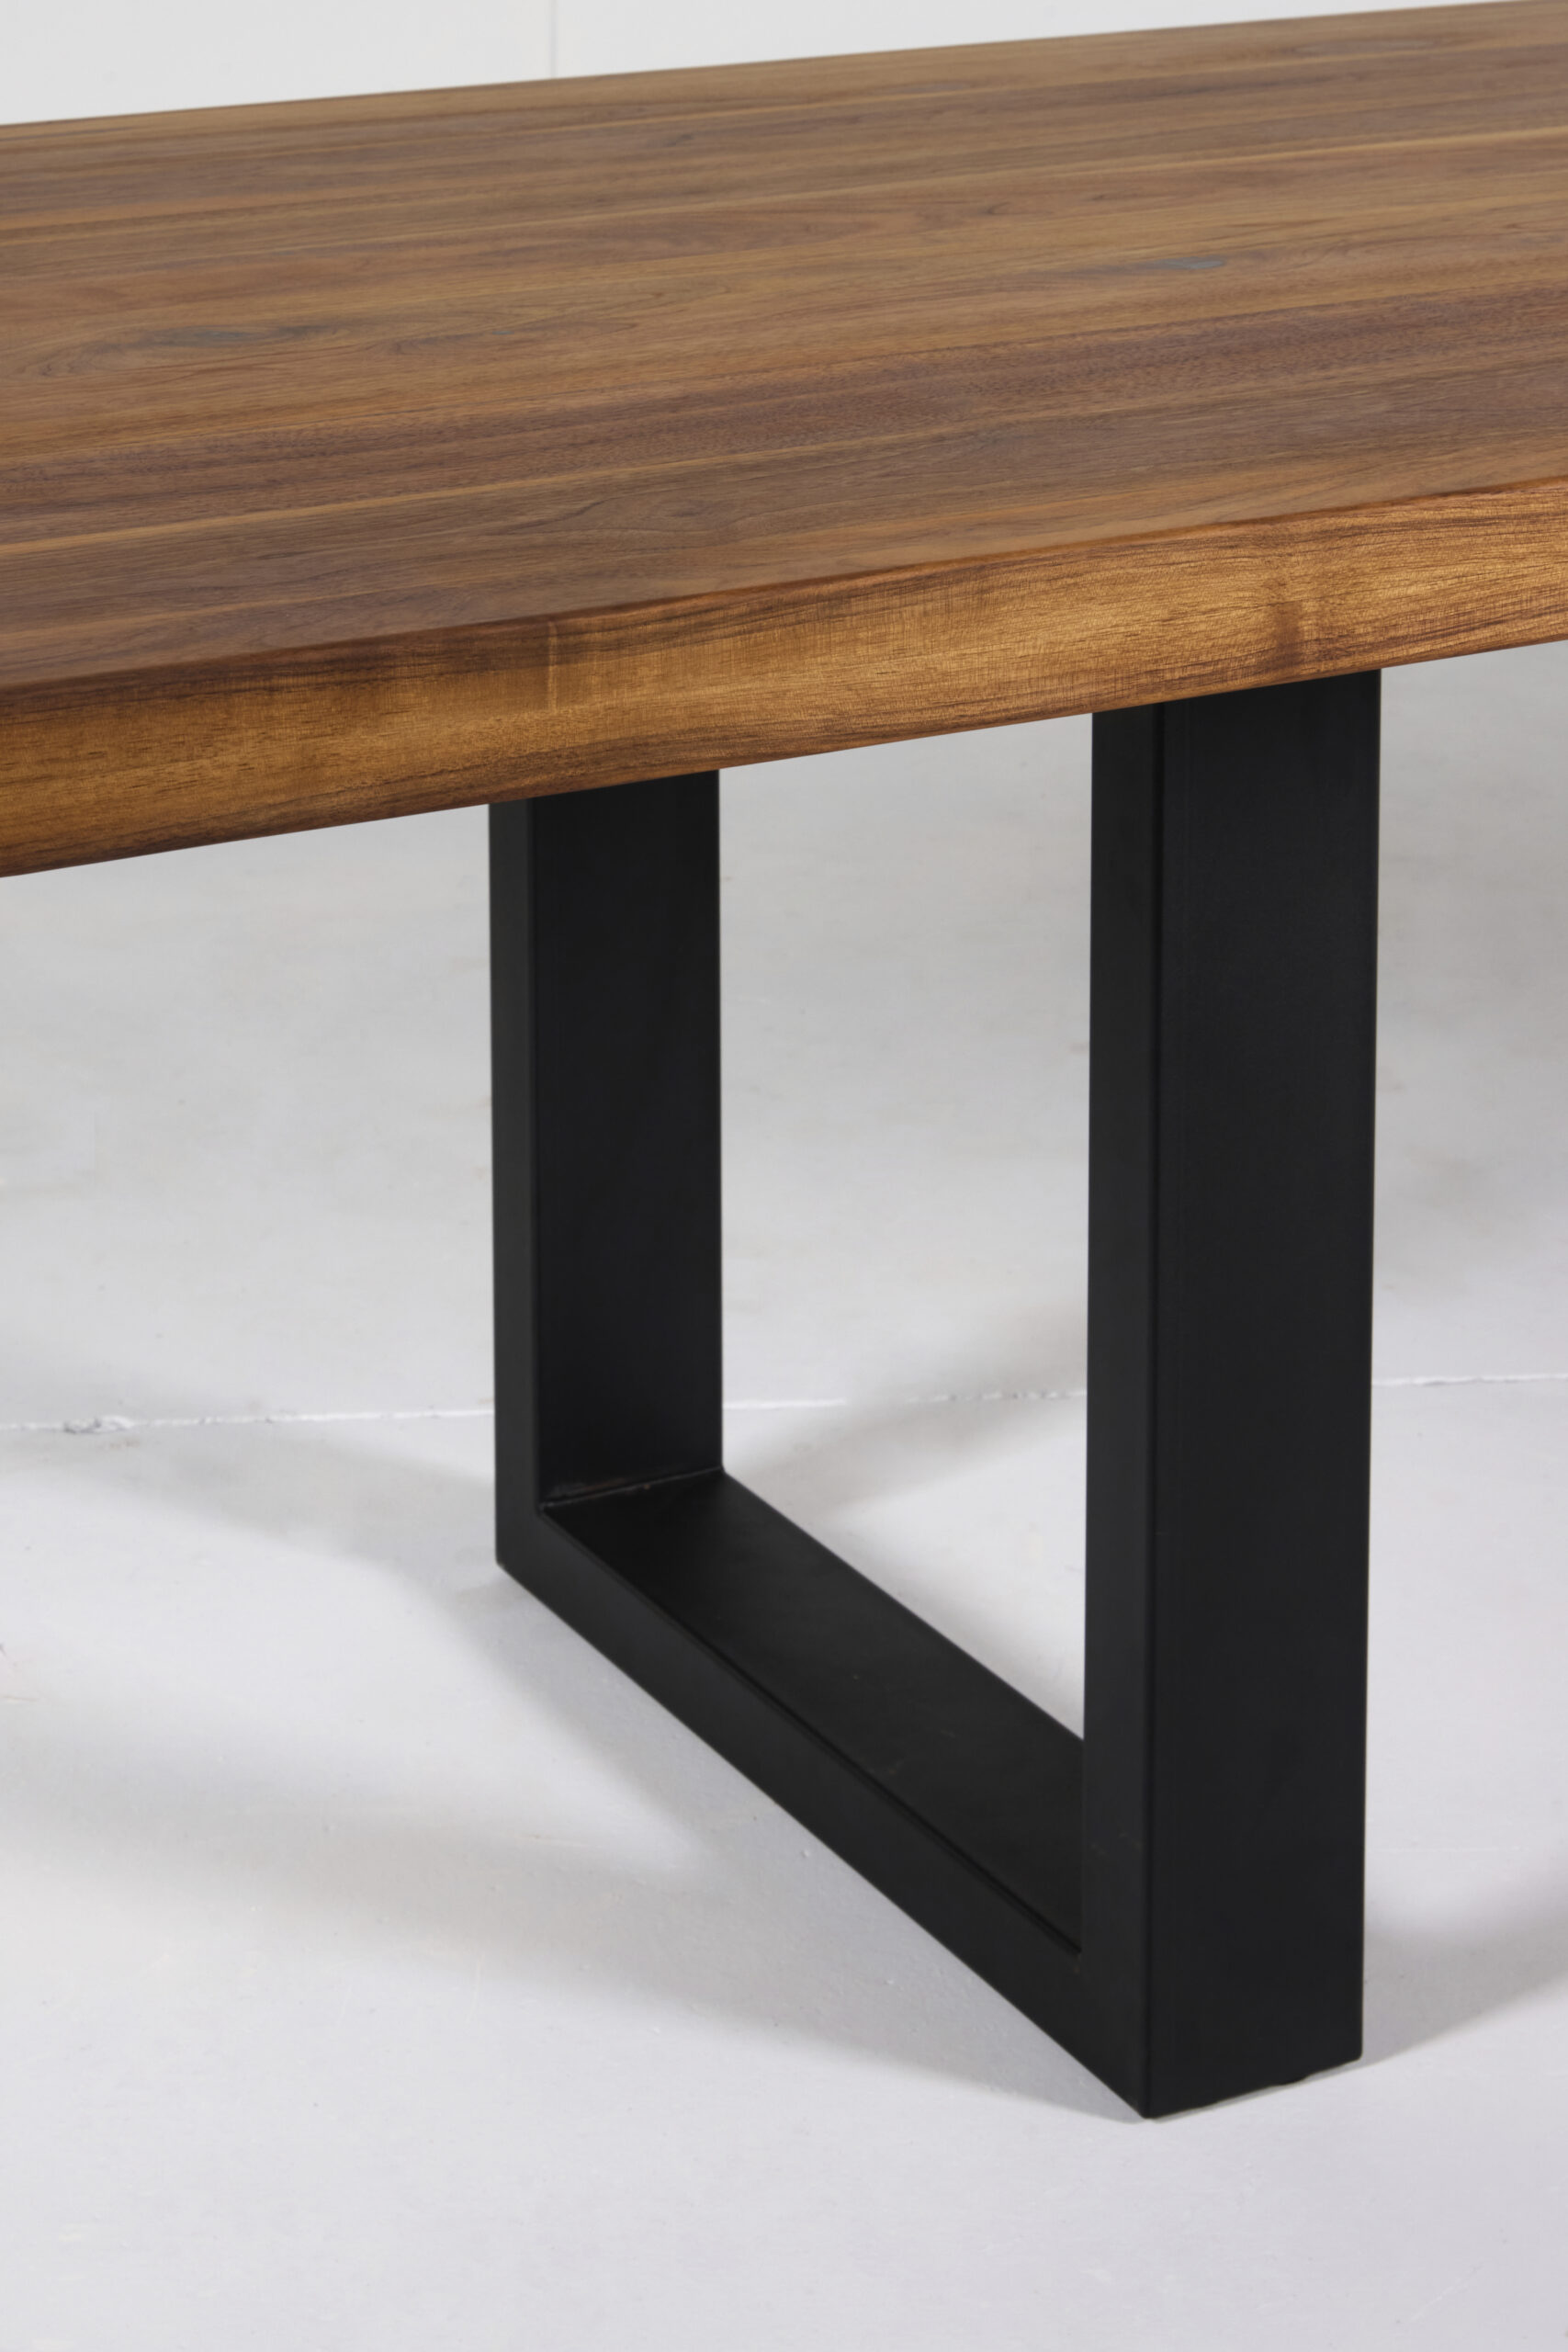 Image of Noosa Dining Table by Arranmore Furniture, showcasing its sleek U or Klein Leg design in a modern dining setting.